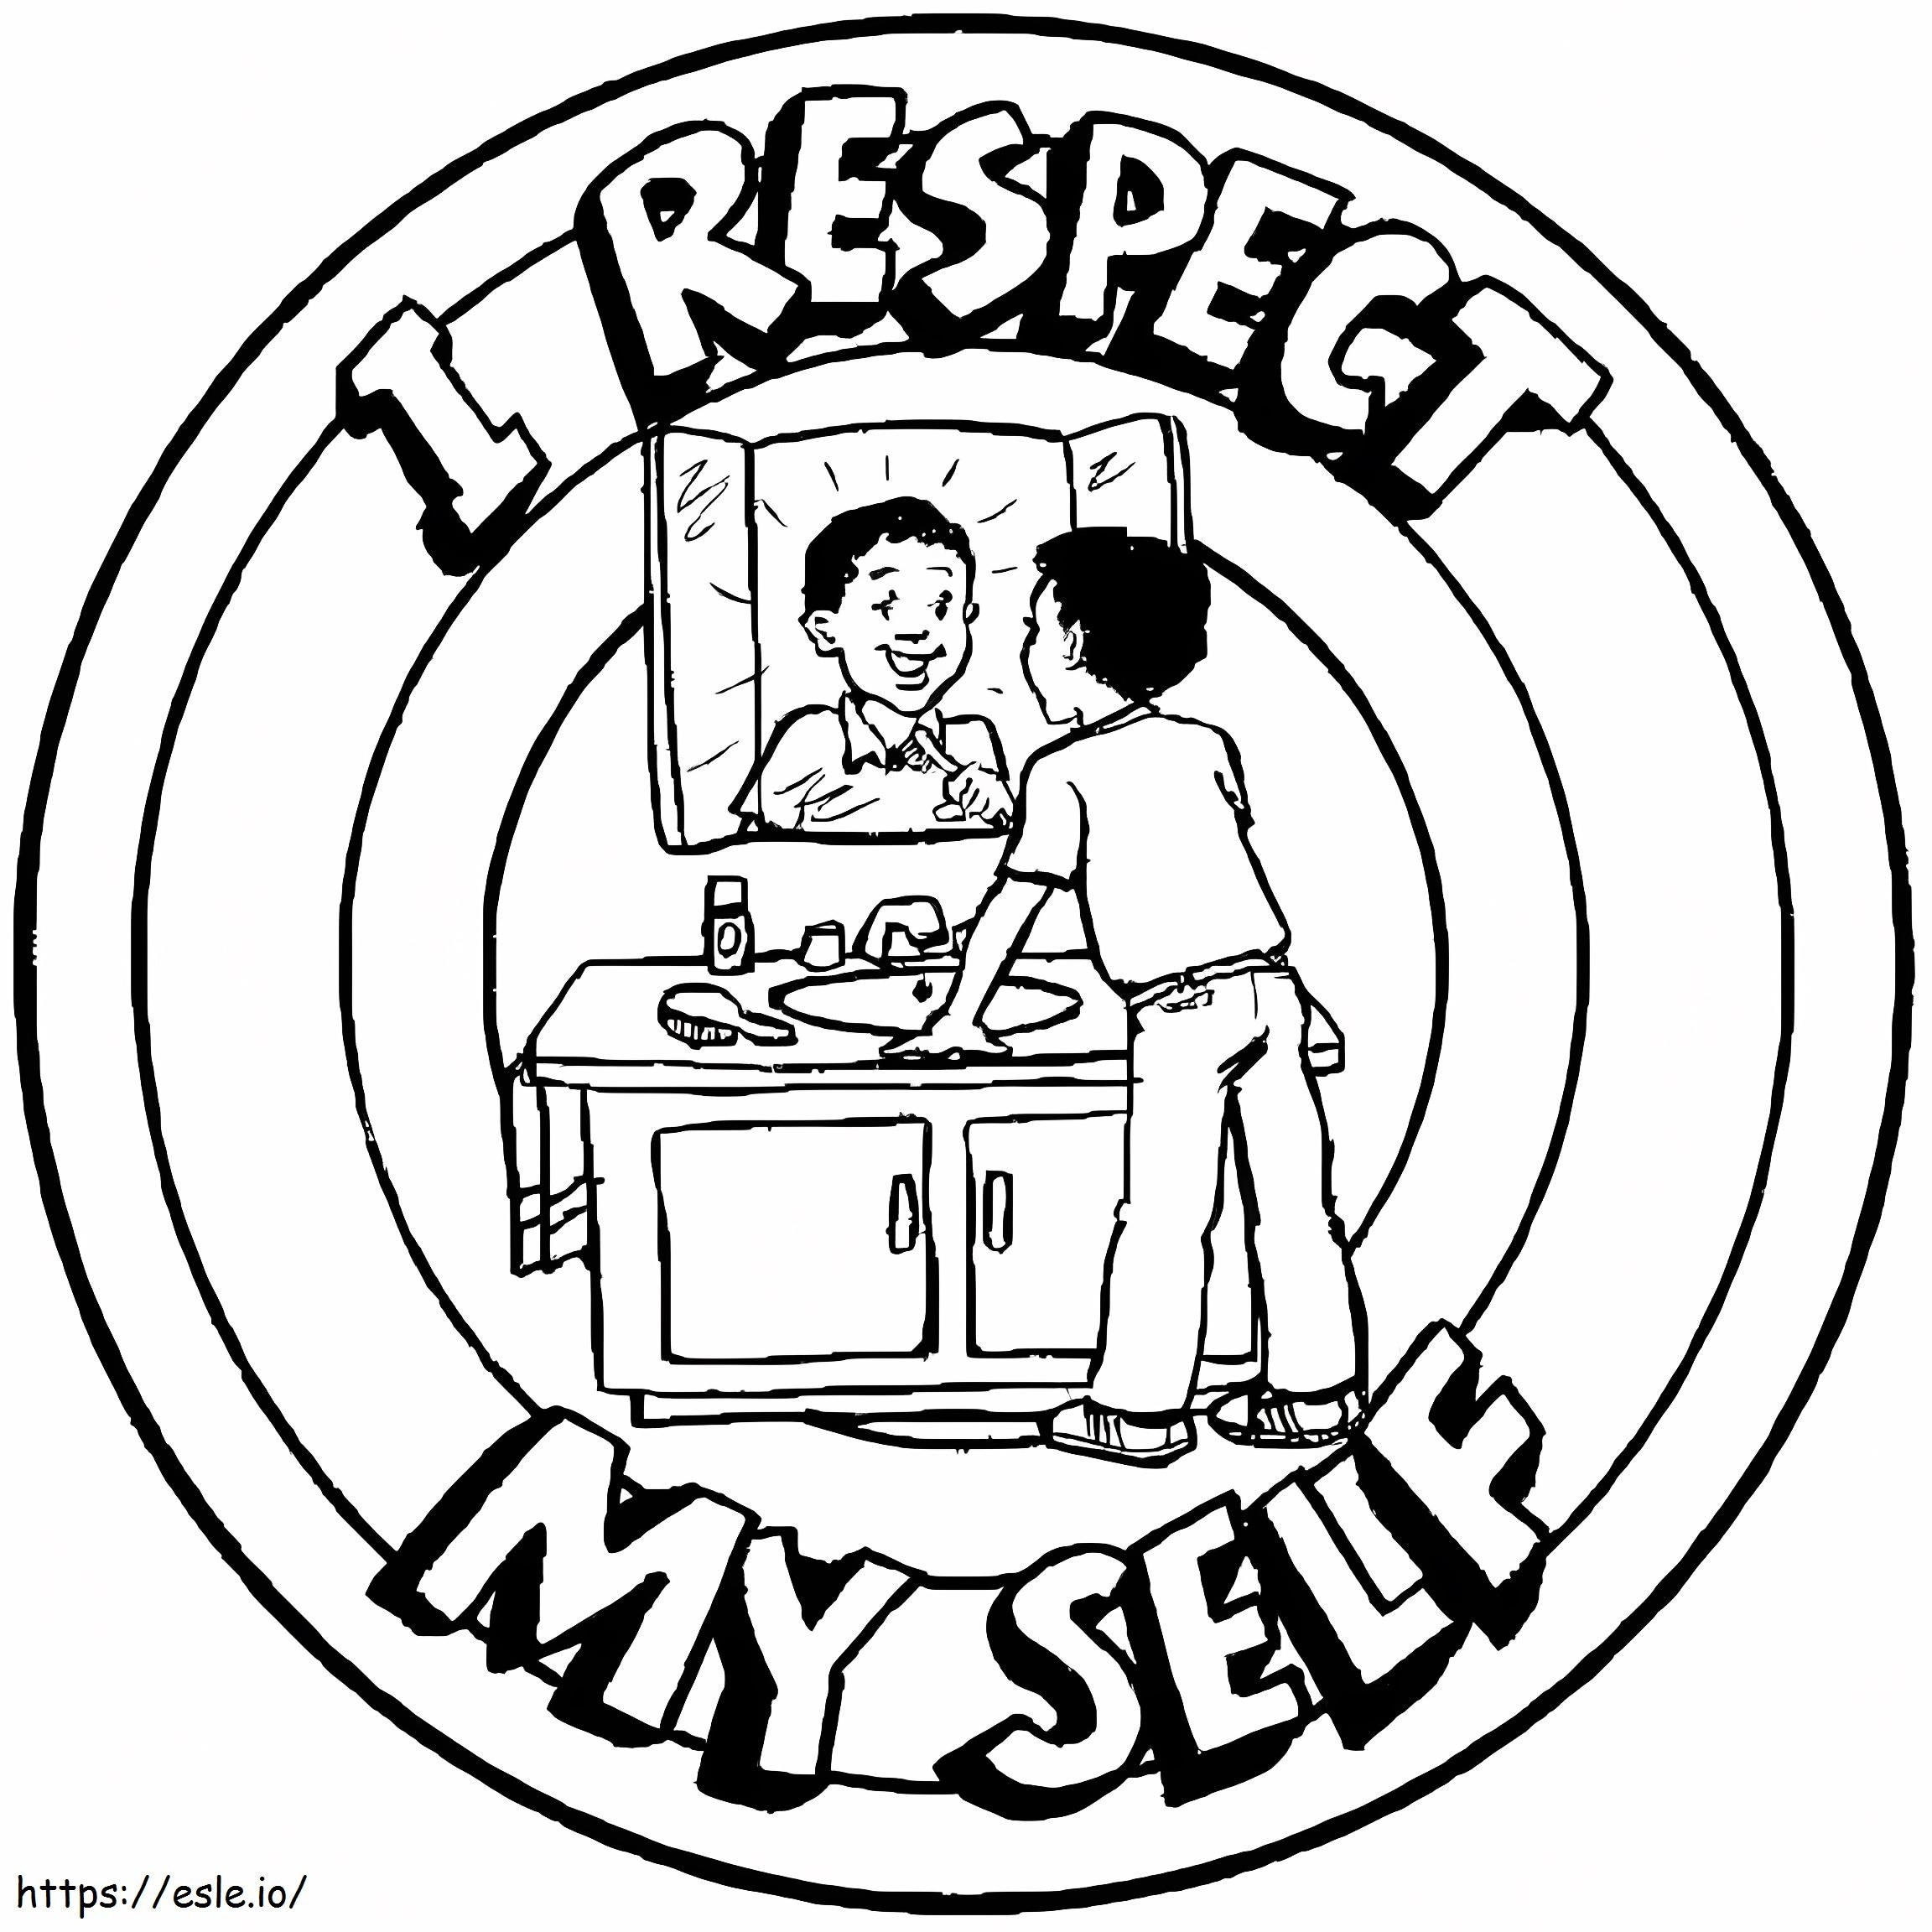 I Respect Myself coloring page